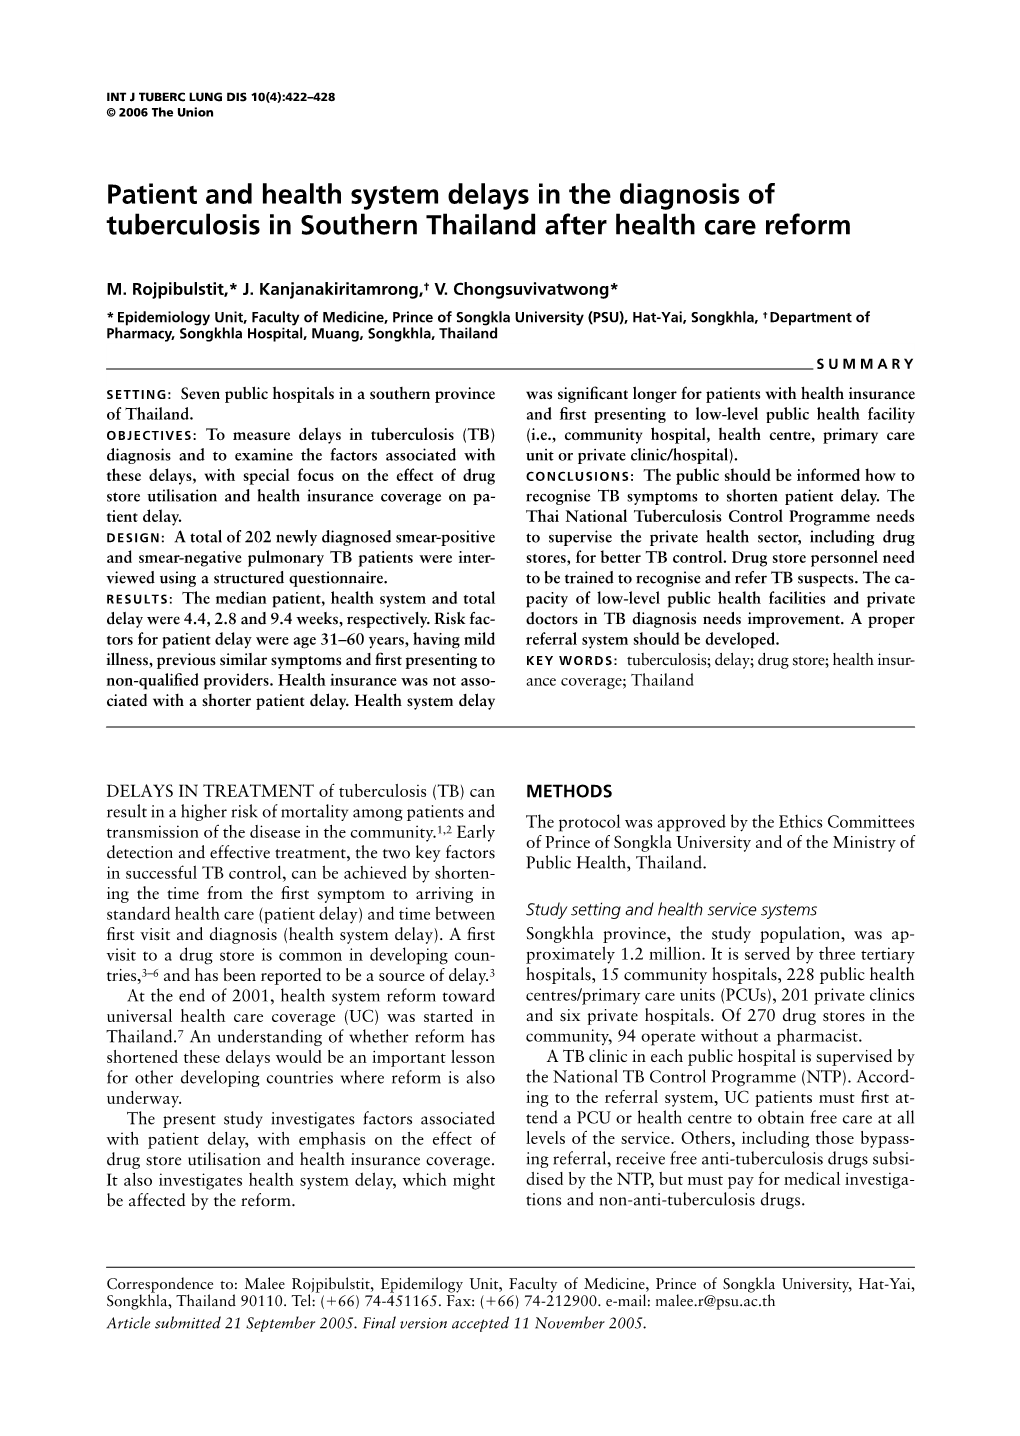 Patient and Health System Delays in the Diagnosis of Tuberculosis in Southern Thailand After Health Care Reform